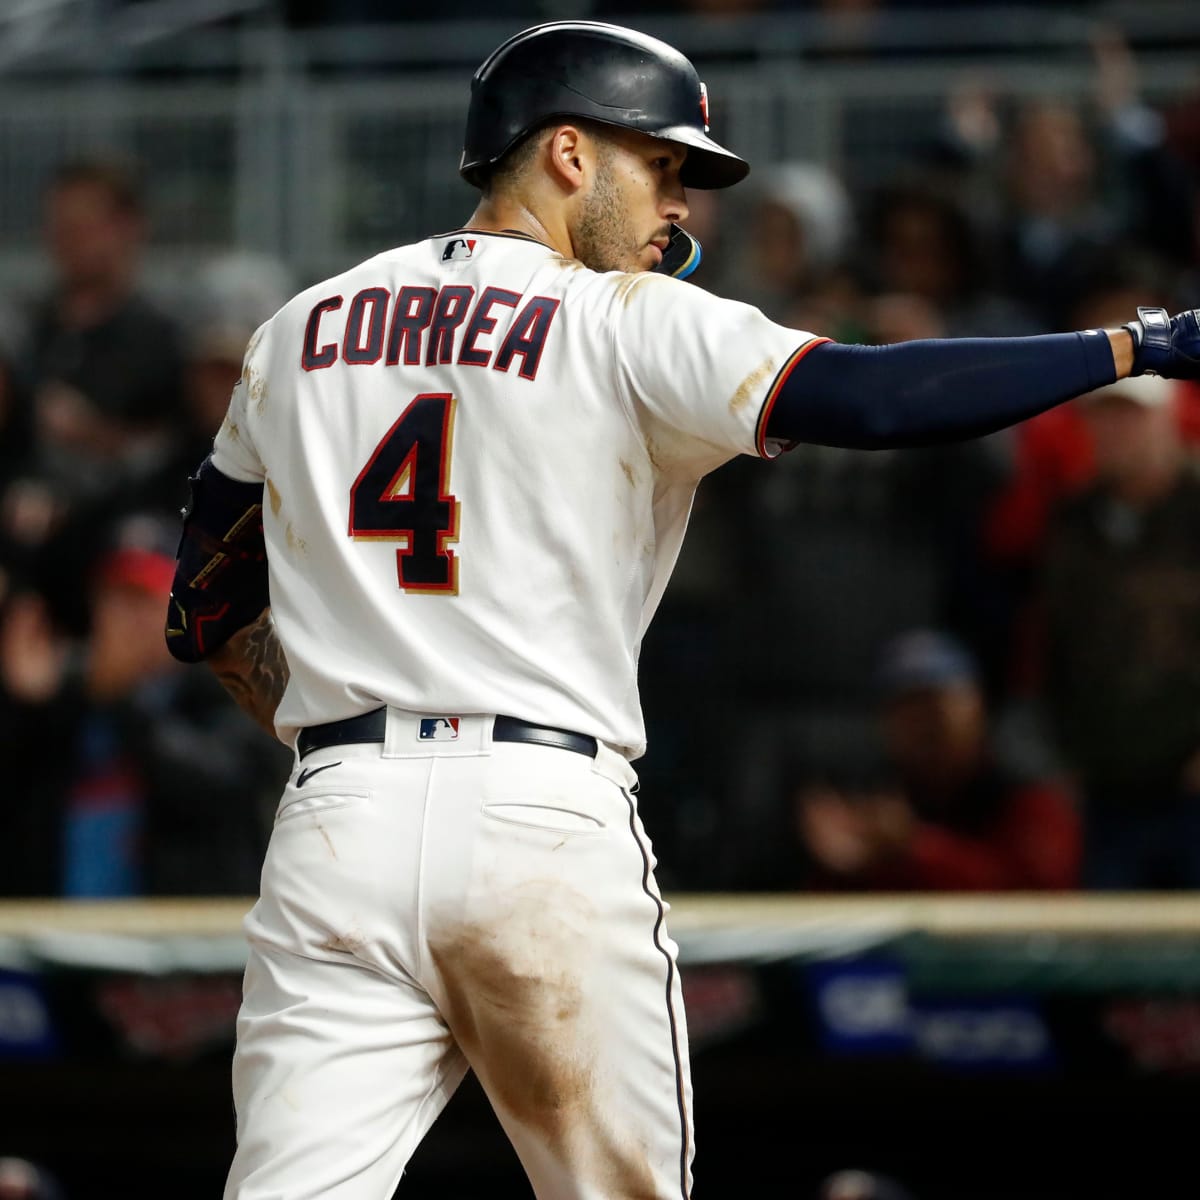 Carlos Correa injury update: Twins star on IL with foot issue as